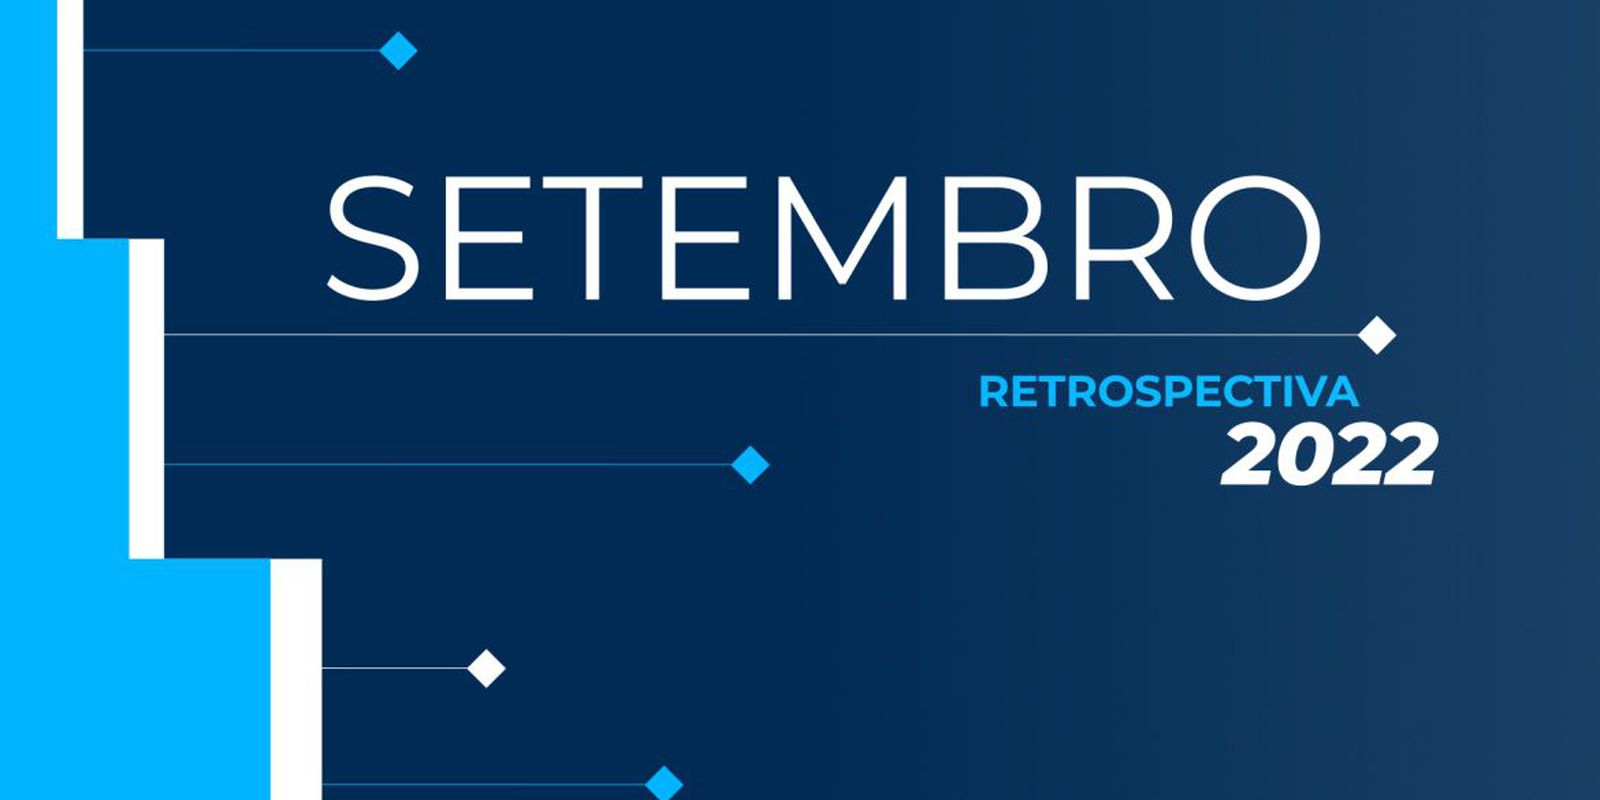 Retrospective 2022: check out the main news of September